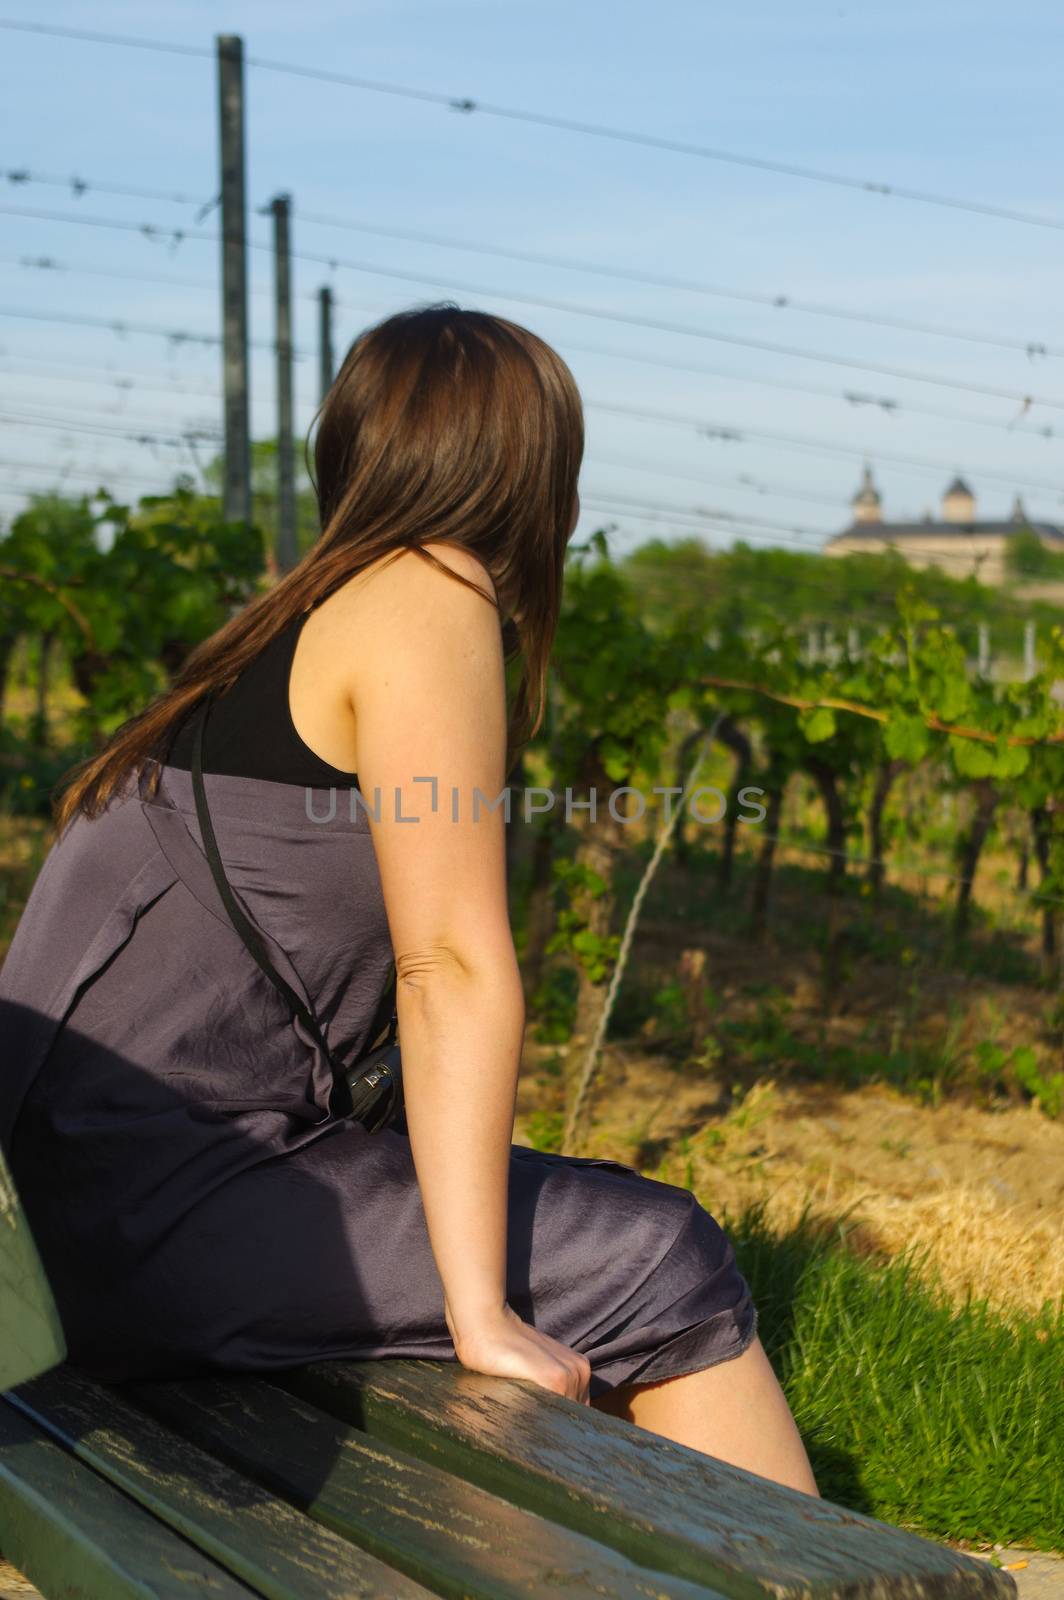 a happy girl on bench relaxing with a view to grape field landcape